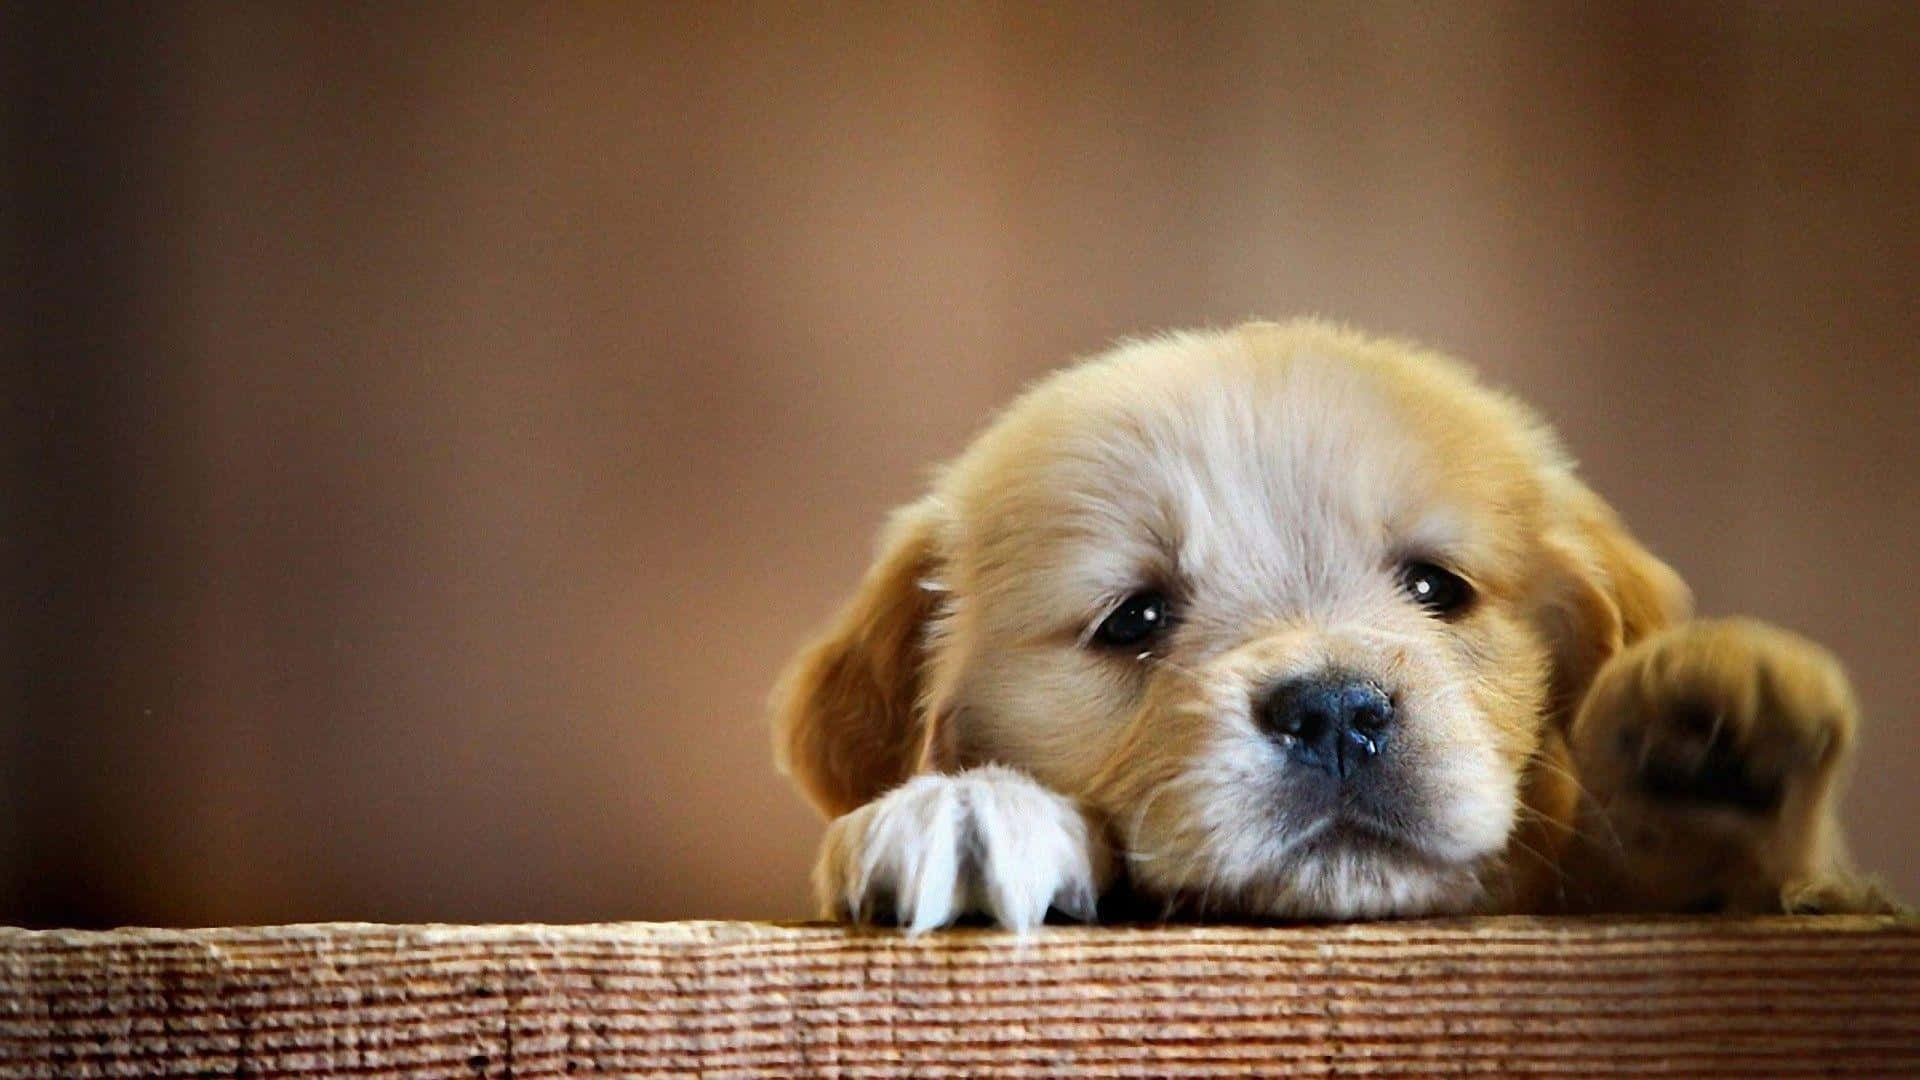 A Puppy Is Looking Over A Wooden Railing